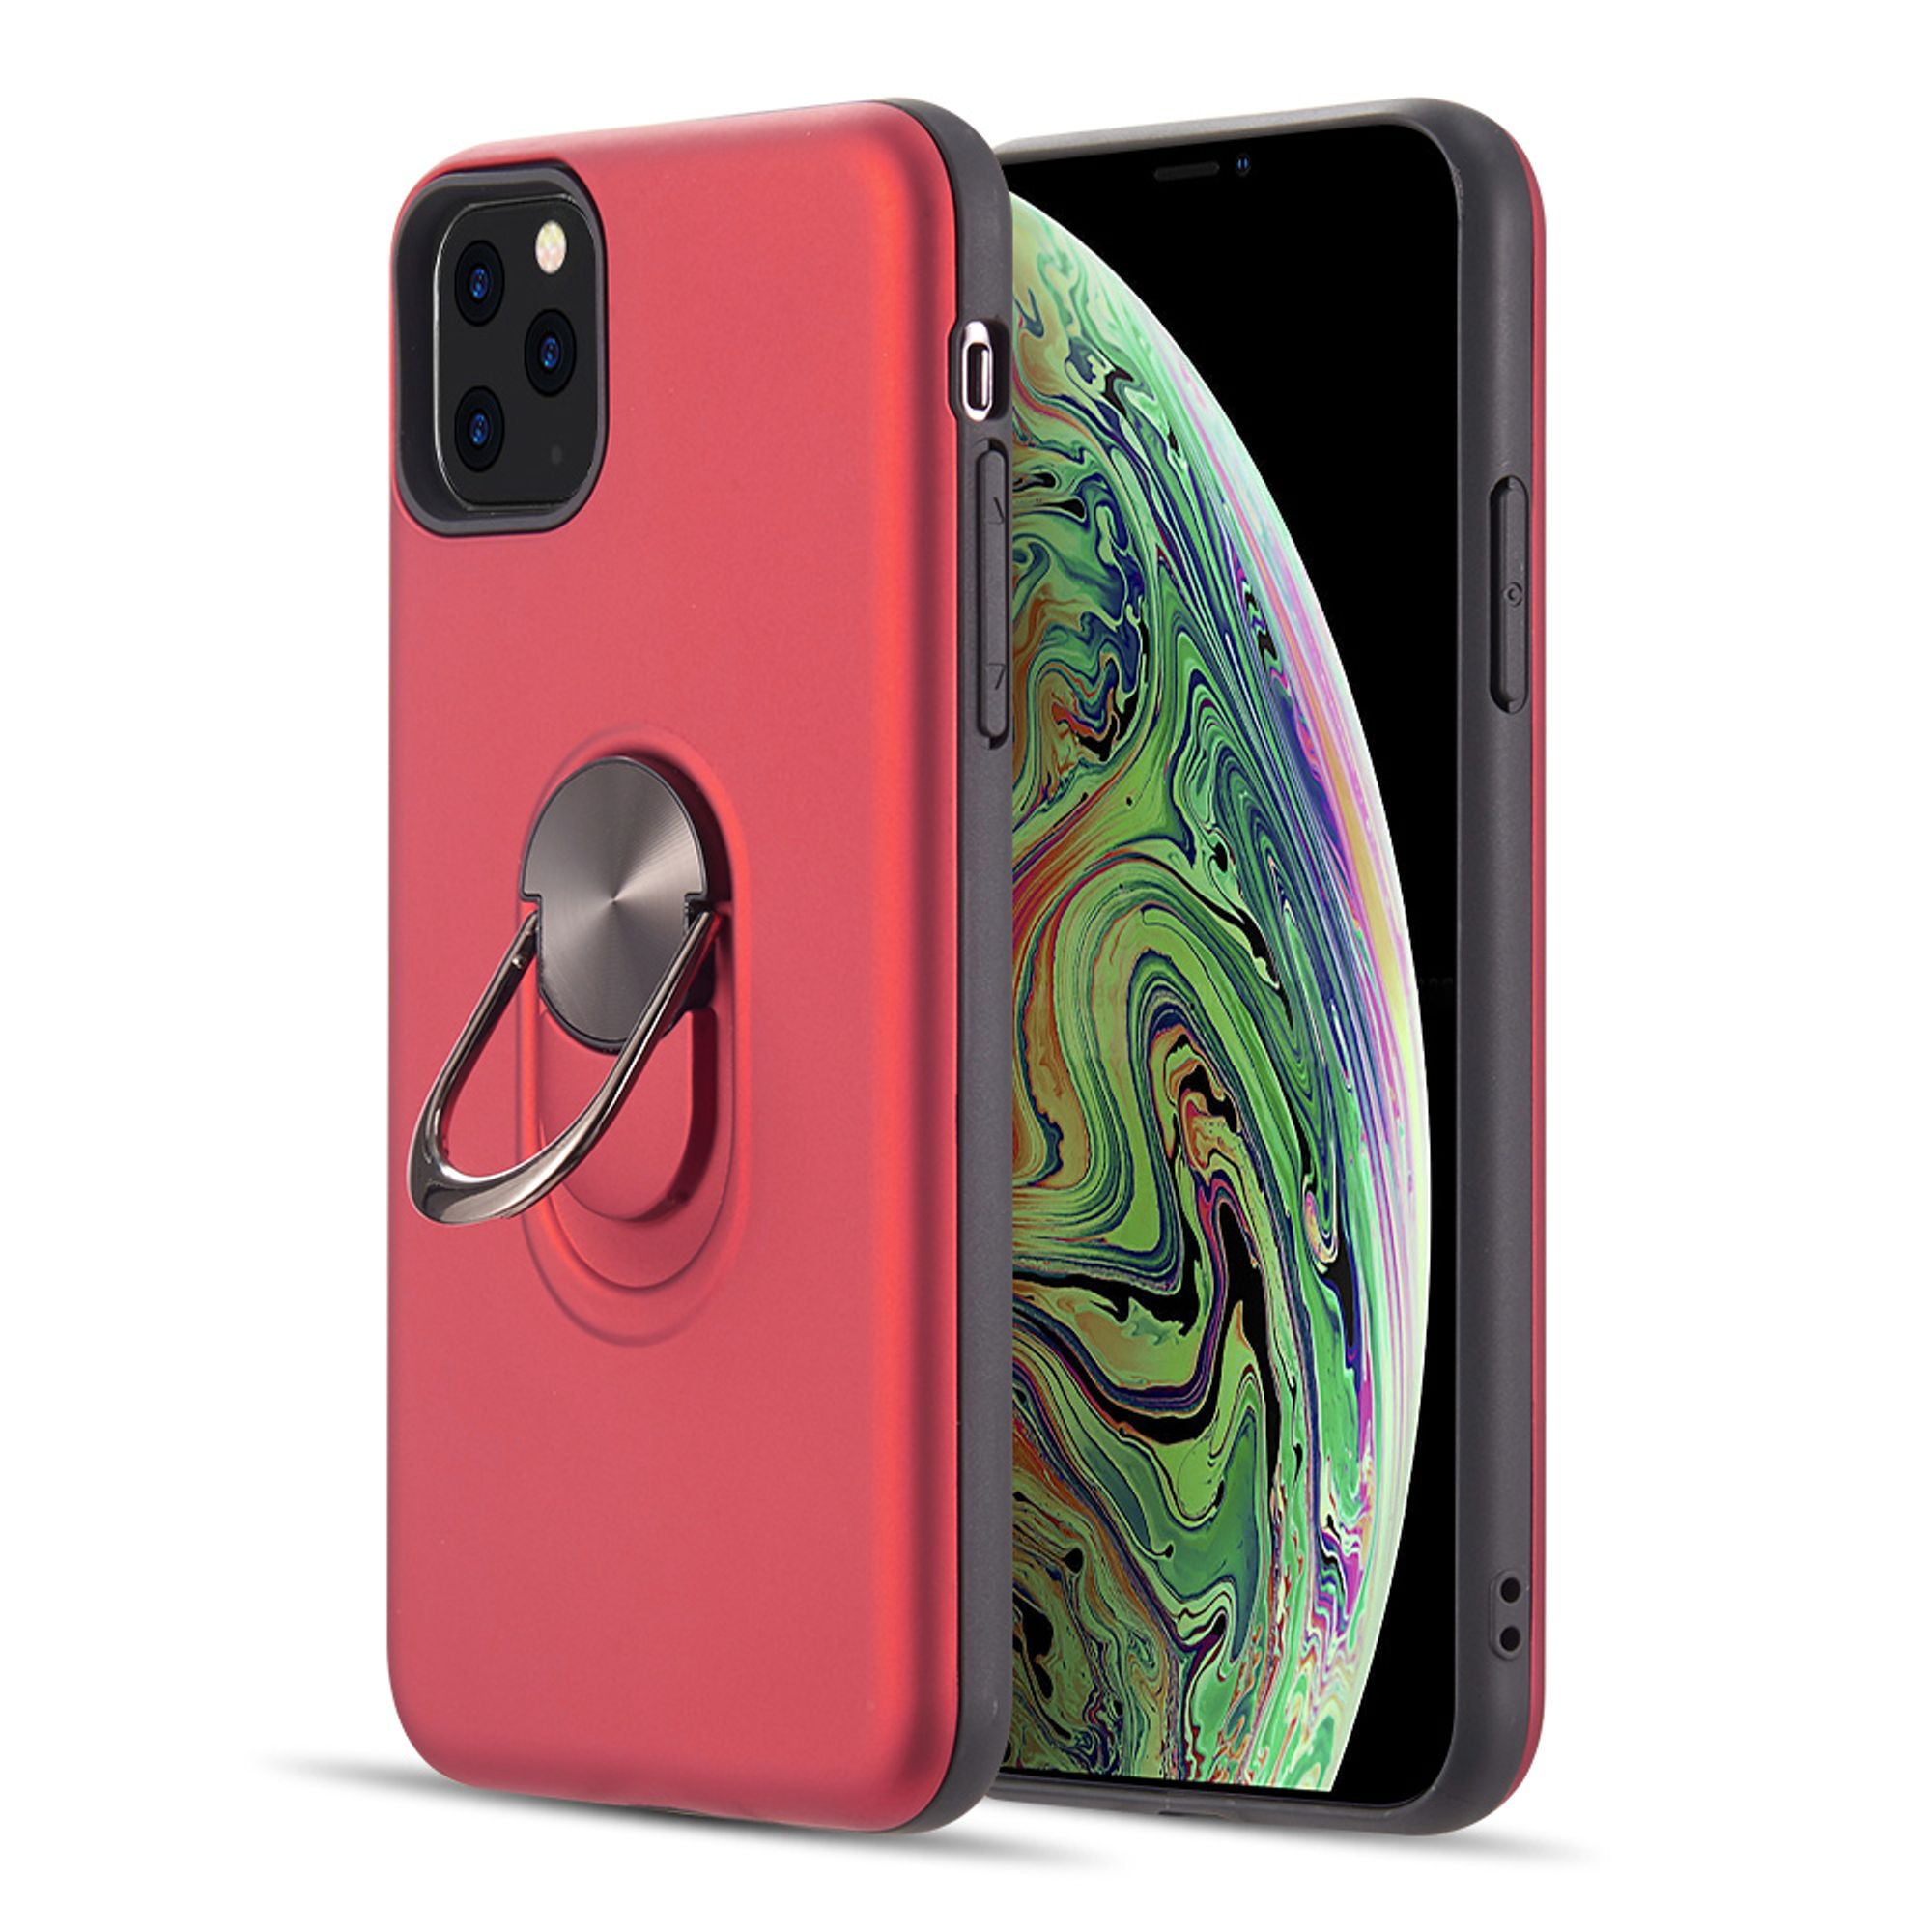 cases 11 ee iphone Hard Plastic Insten iPhone Max 11 Apple Pro For Case, by